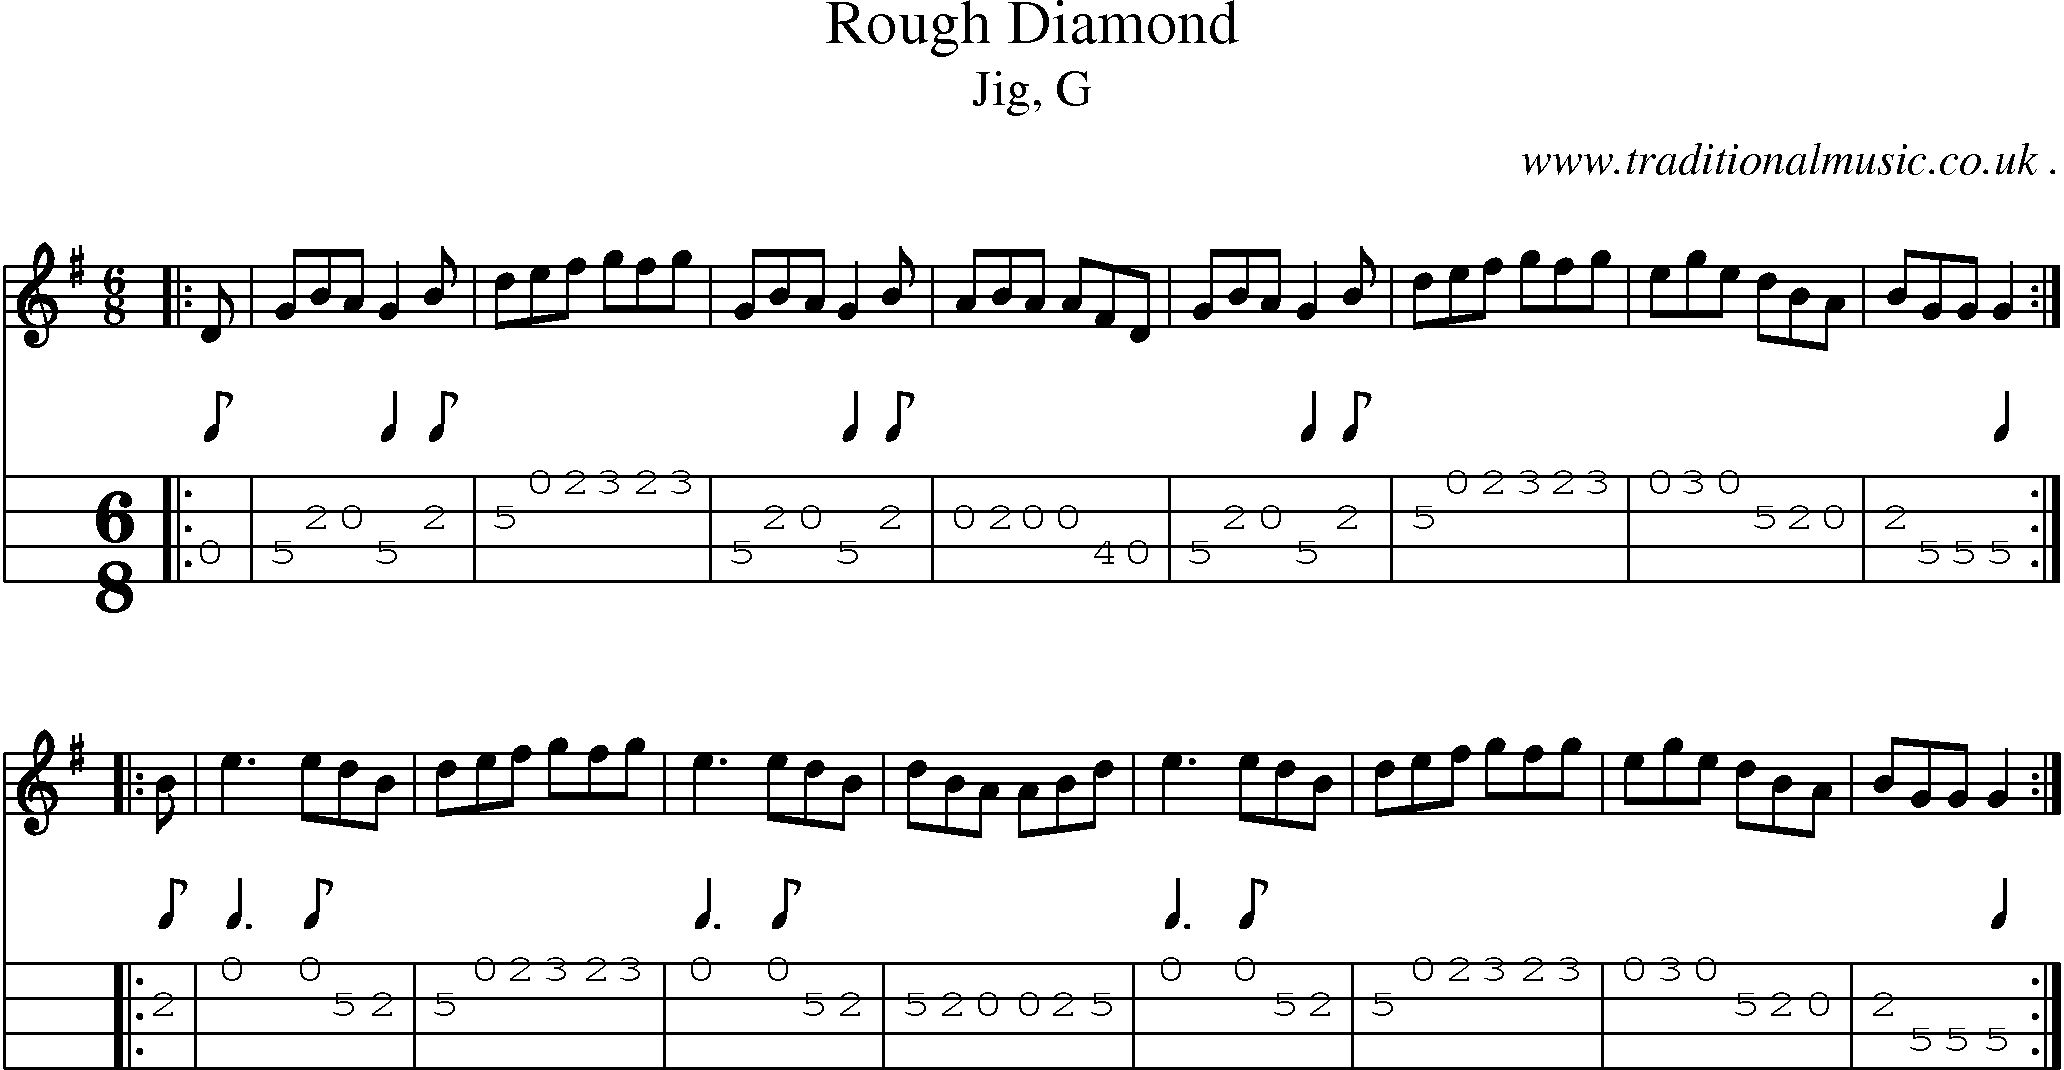 Sheet-music  score, Chords and Mandolin Tabs for Rough Diamond